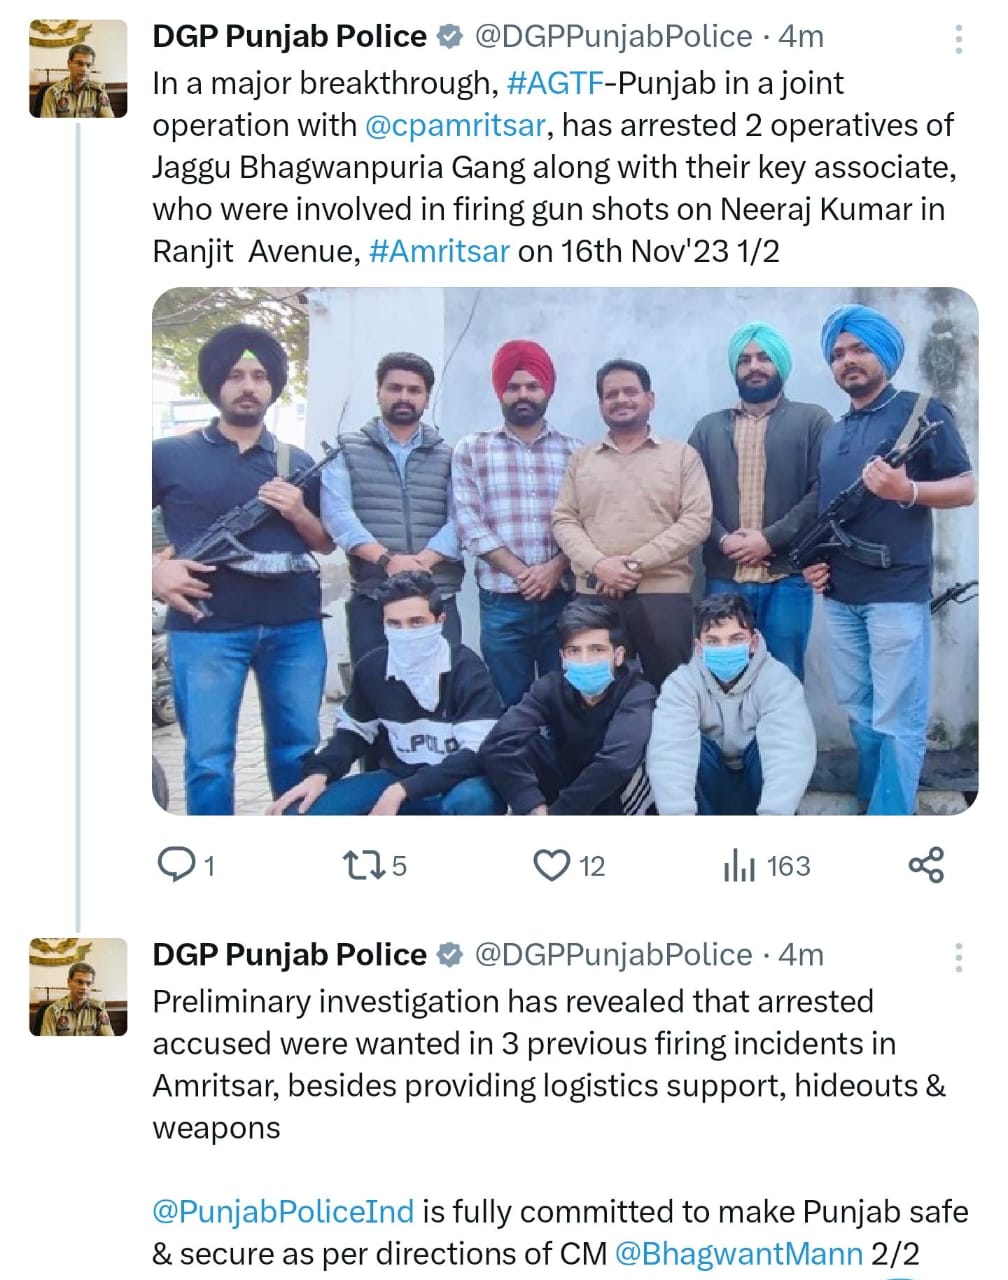 Three persons arrested including two activists of Jaggu Bhagwanpuria gang; The car used in the crime was also recovered